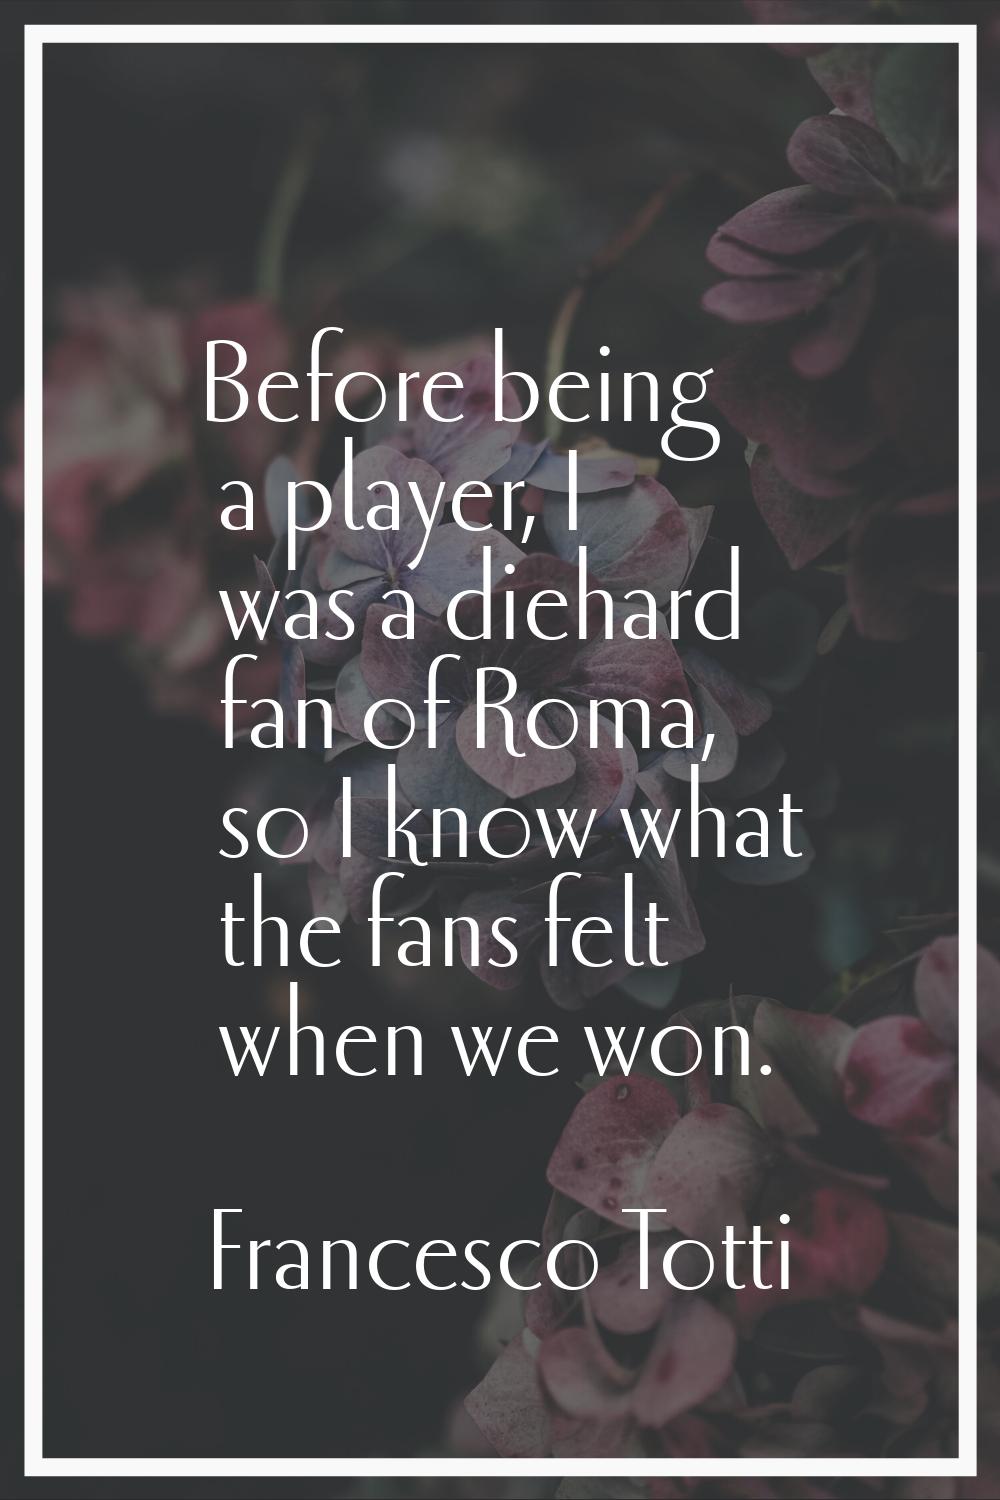 Before being a player, I was a diehard fan of Roma, so I know what the fans felt when we won.